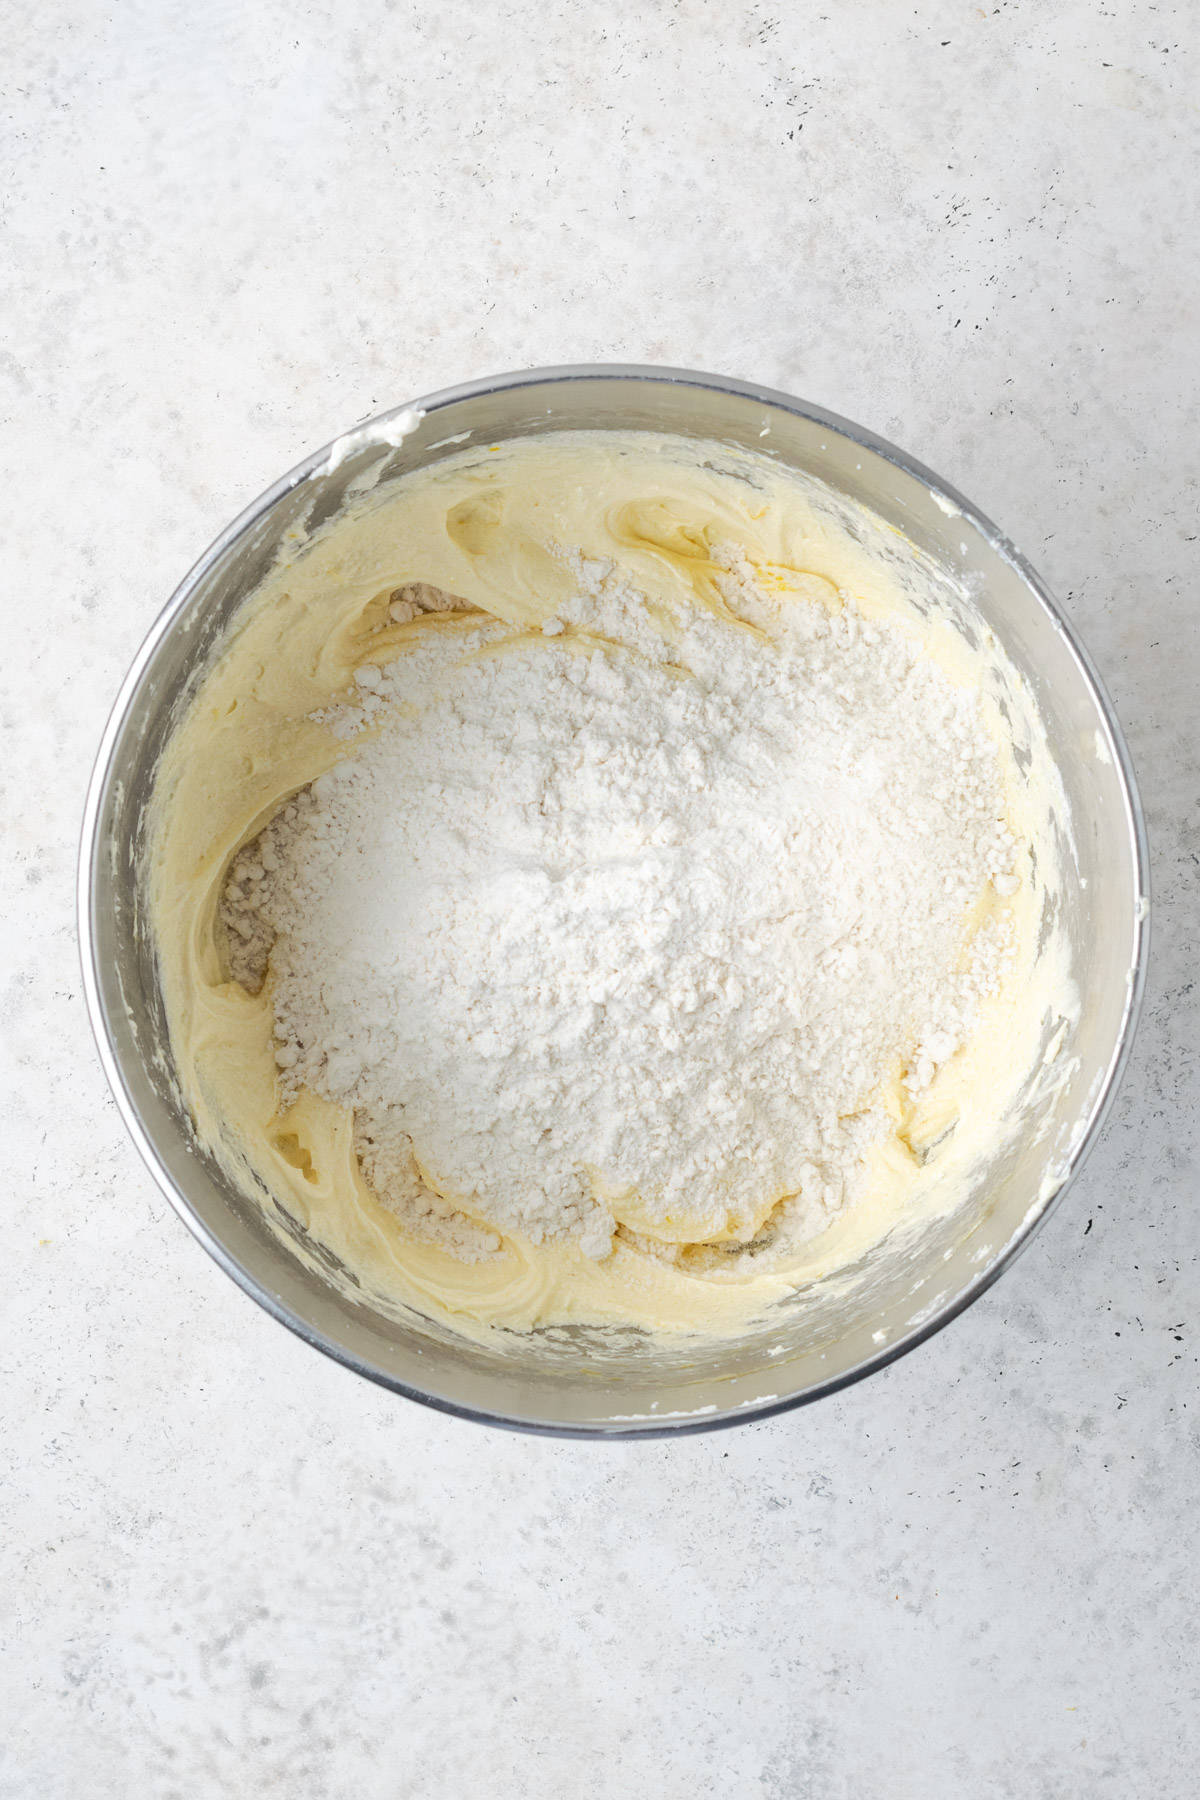 Gluten free flour added to the partially mixed lemon cake batter.